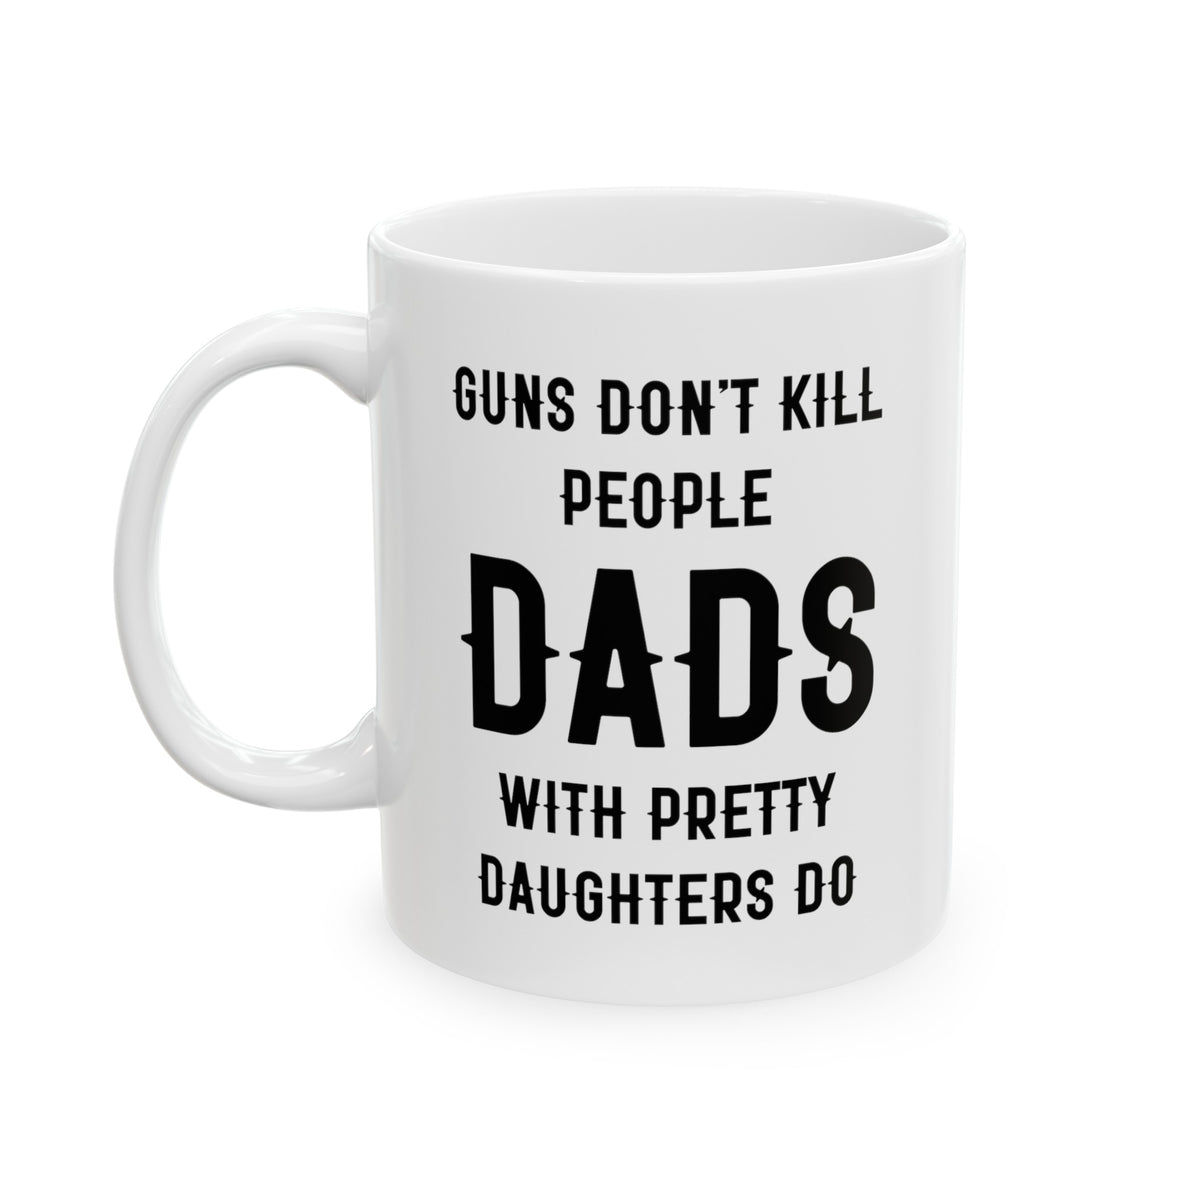 Love Dad Coffee Mug - Guns don't kill people Dads with pretty daughters do - Novelty Gift Idea for Father's Day